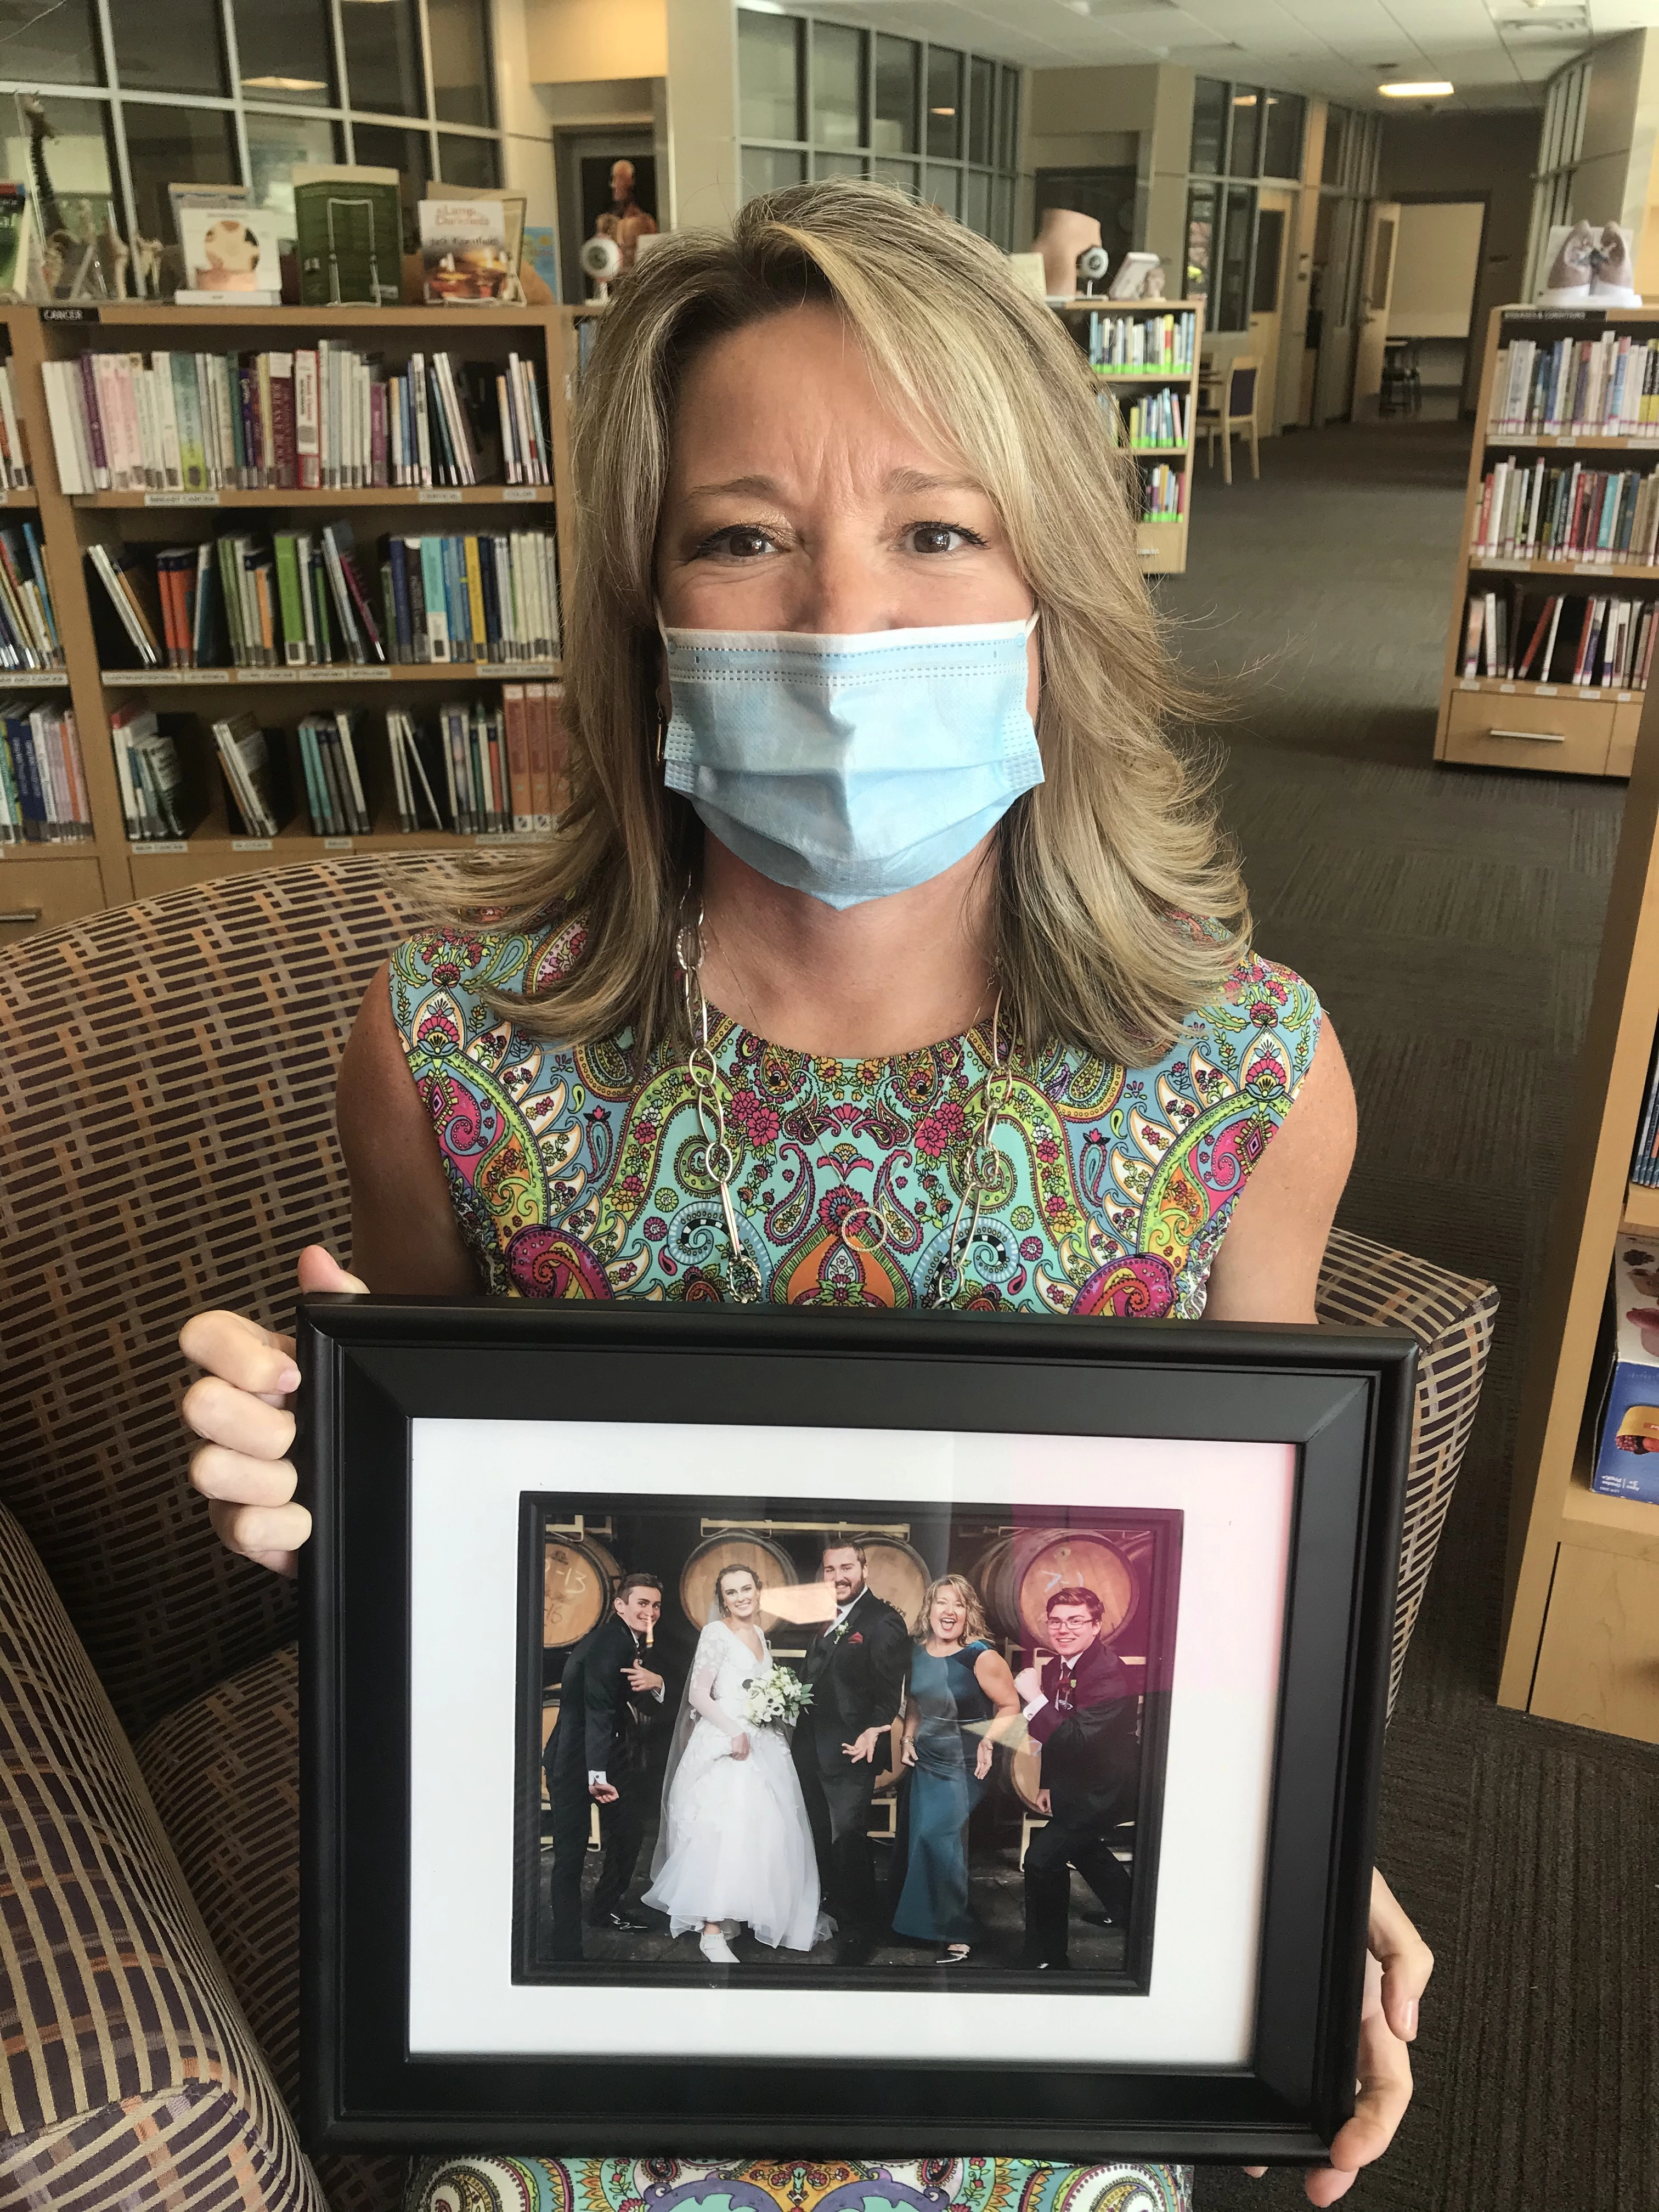 Cyndi L Holds a picture of a family wedding.